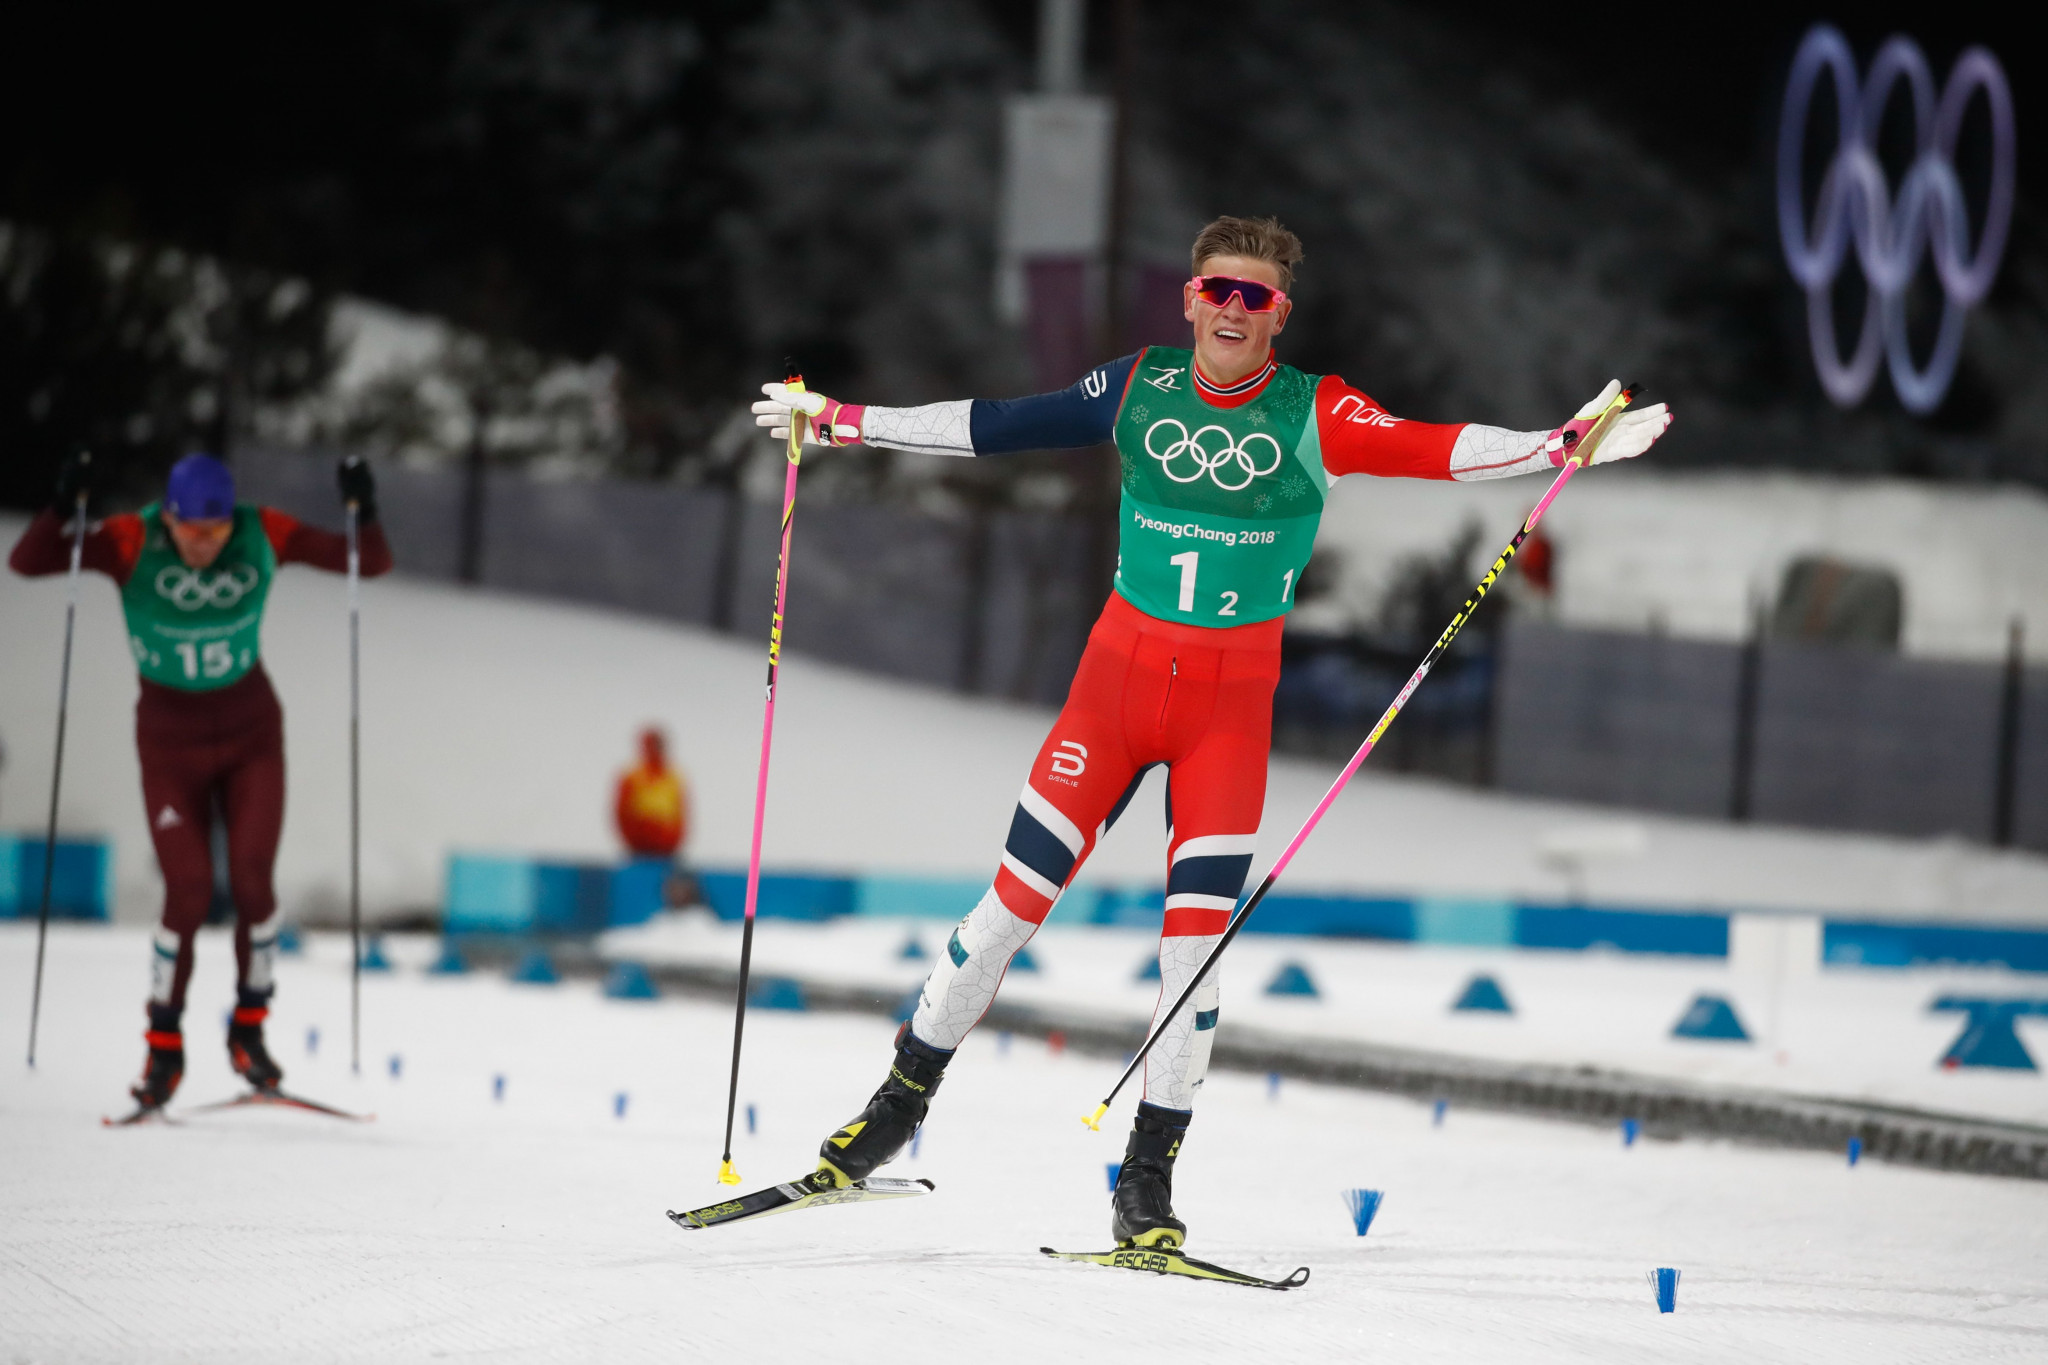 Olympic champions to act as mentors at youth cross-country skiing camp